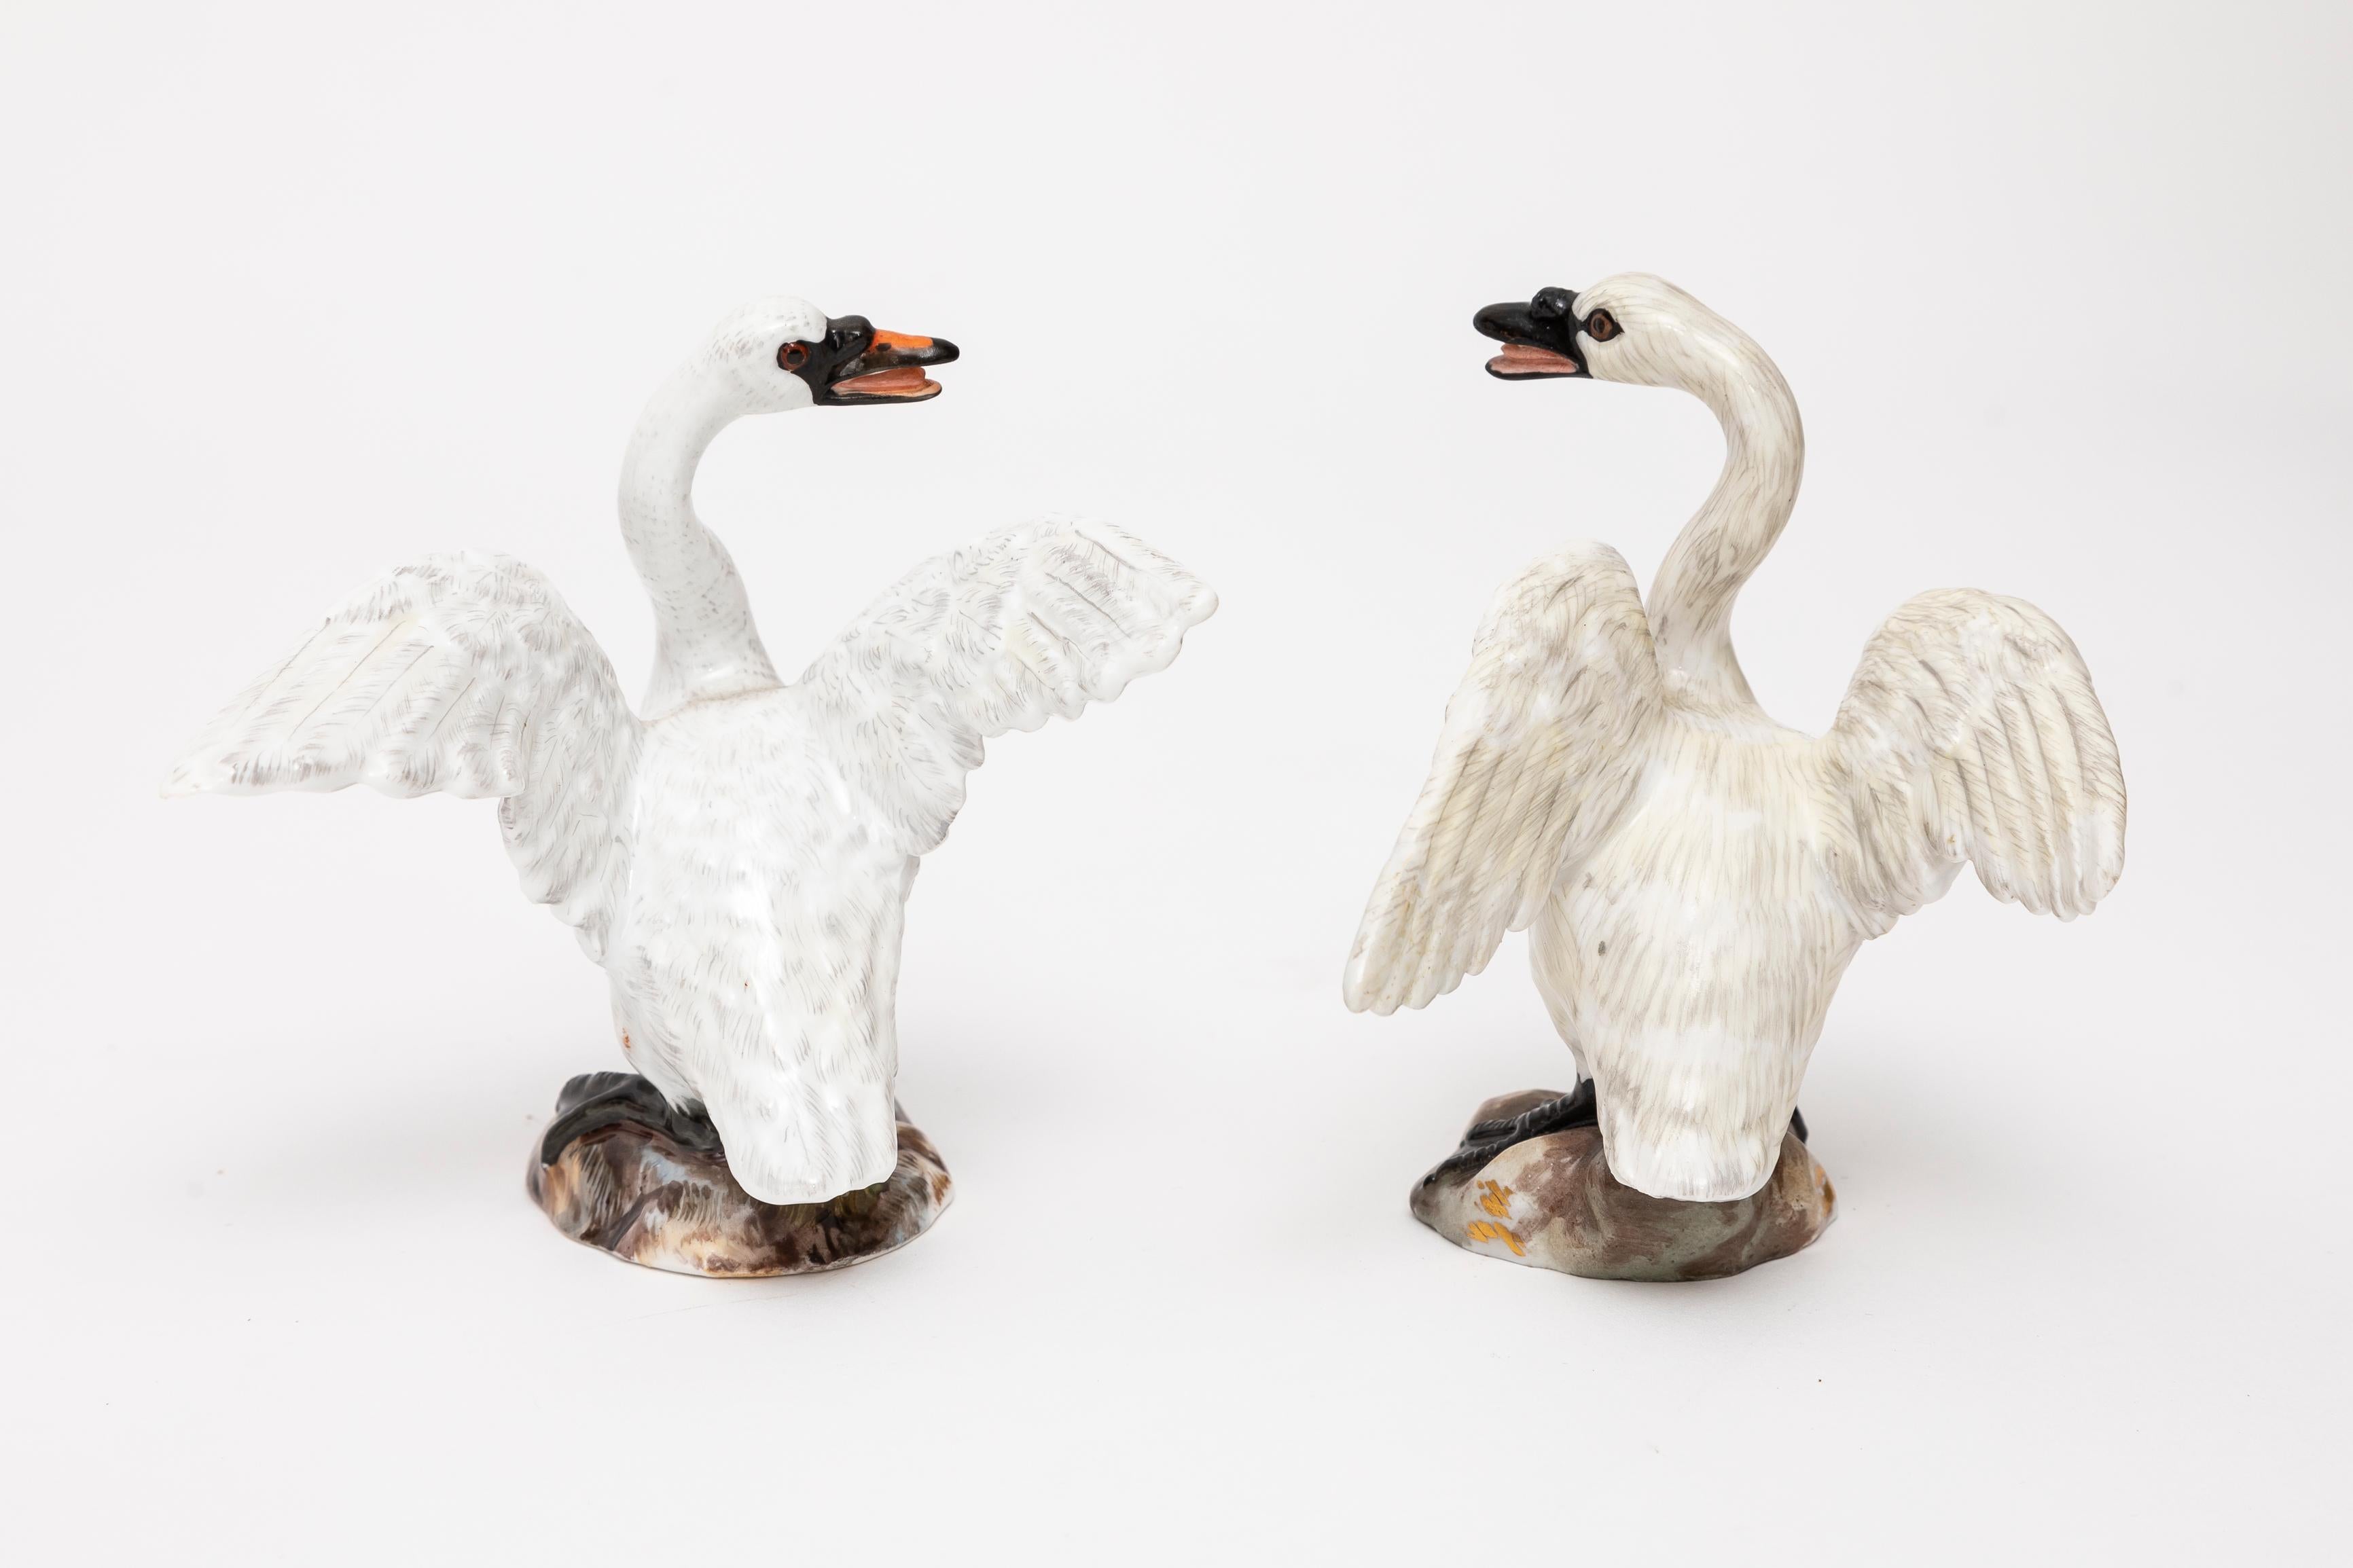 Mid-19th Century A Pair of Early 19th Century Meissen Porcelain Figures of Swans For Sale